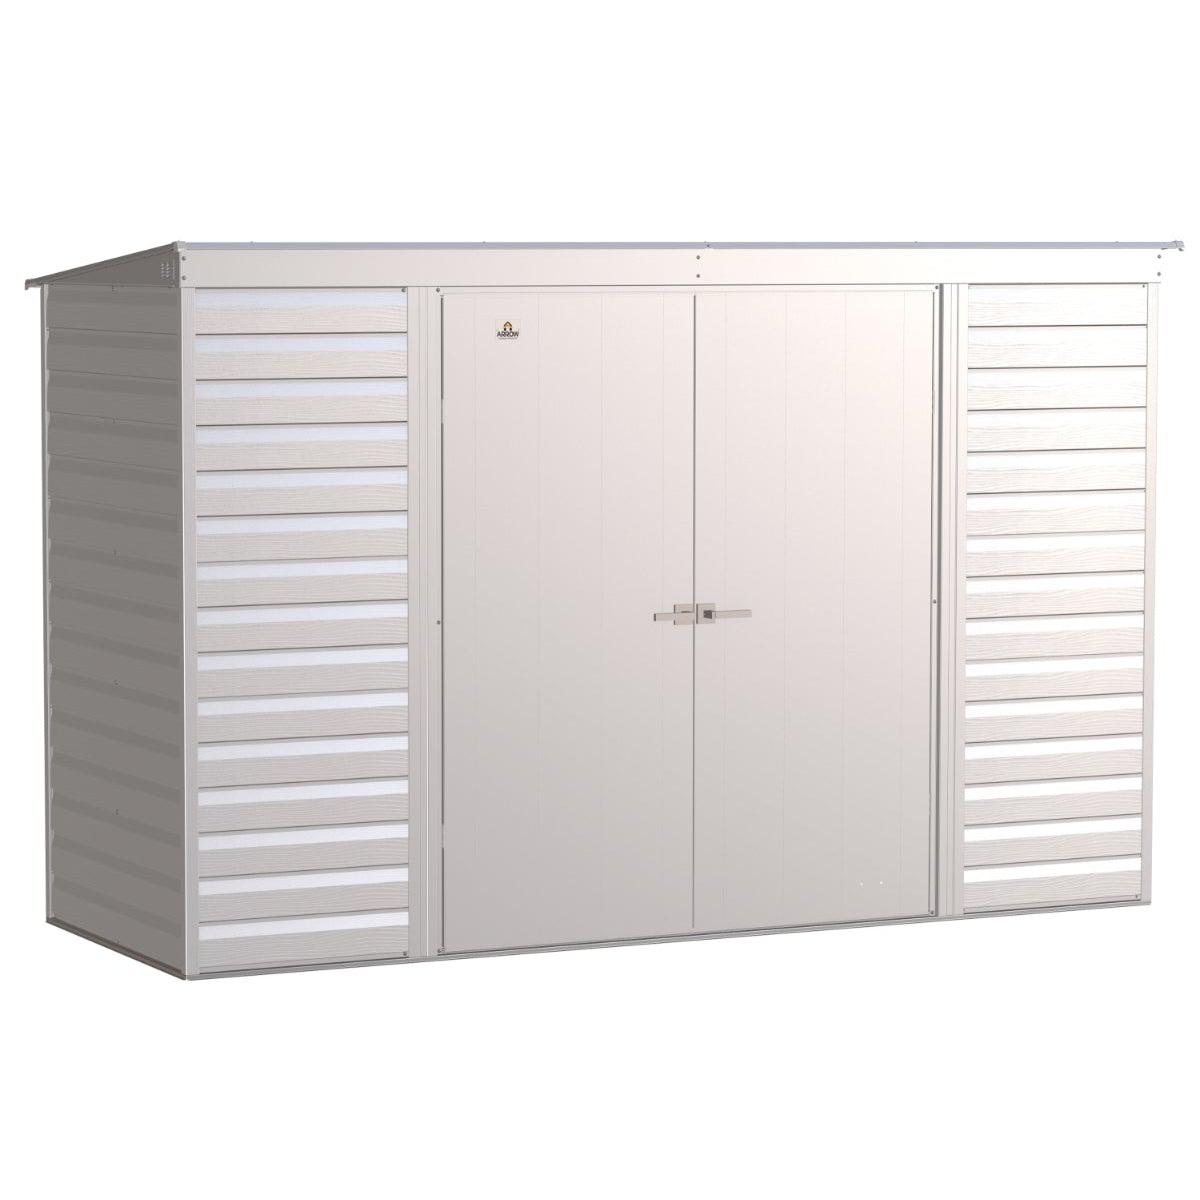 Arrow Select Steel Storage Shed 10 x 4 ft. | Pent Roof - Delightful Yard